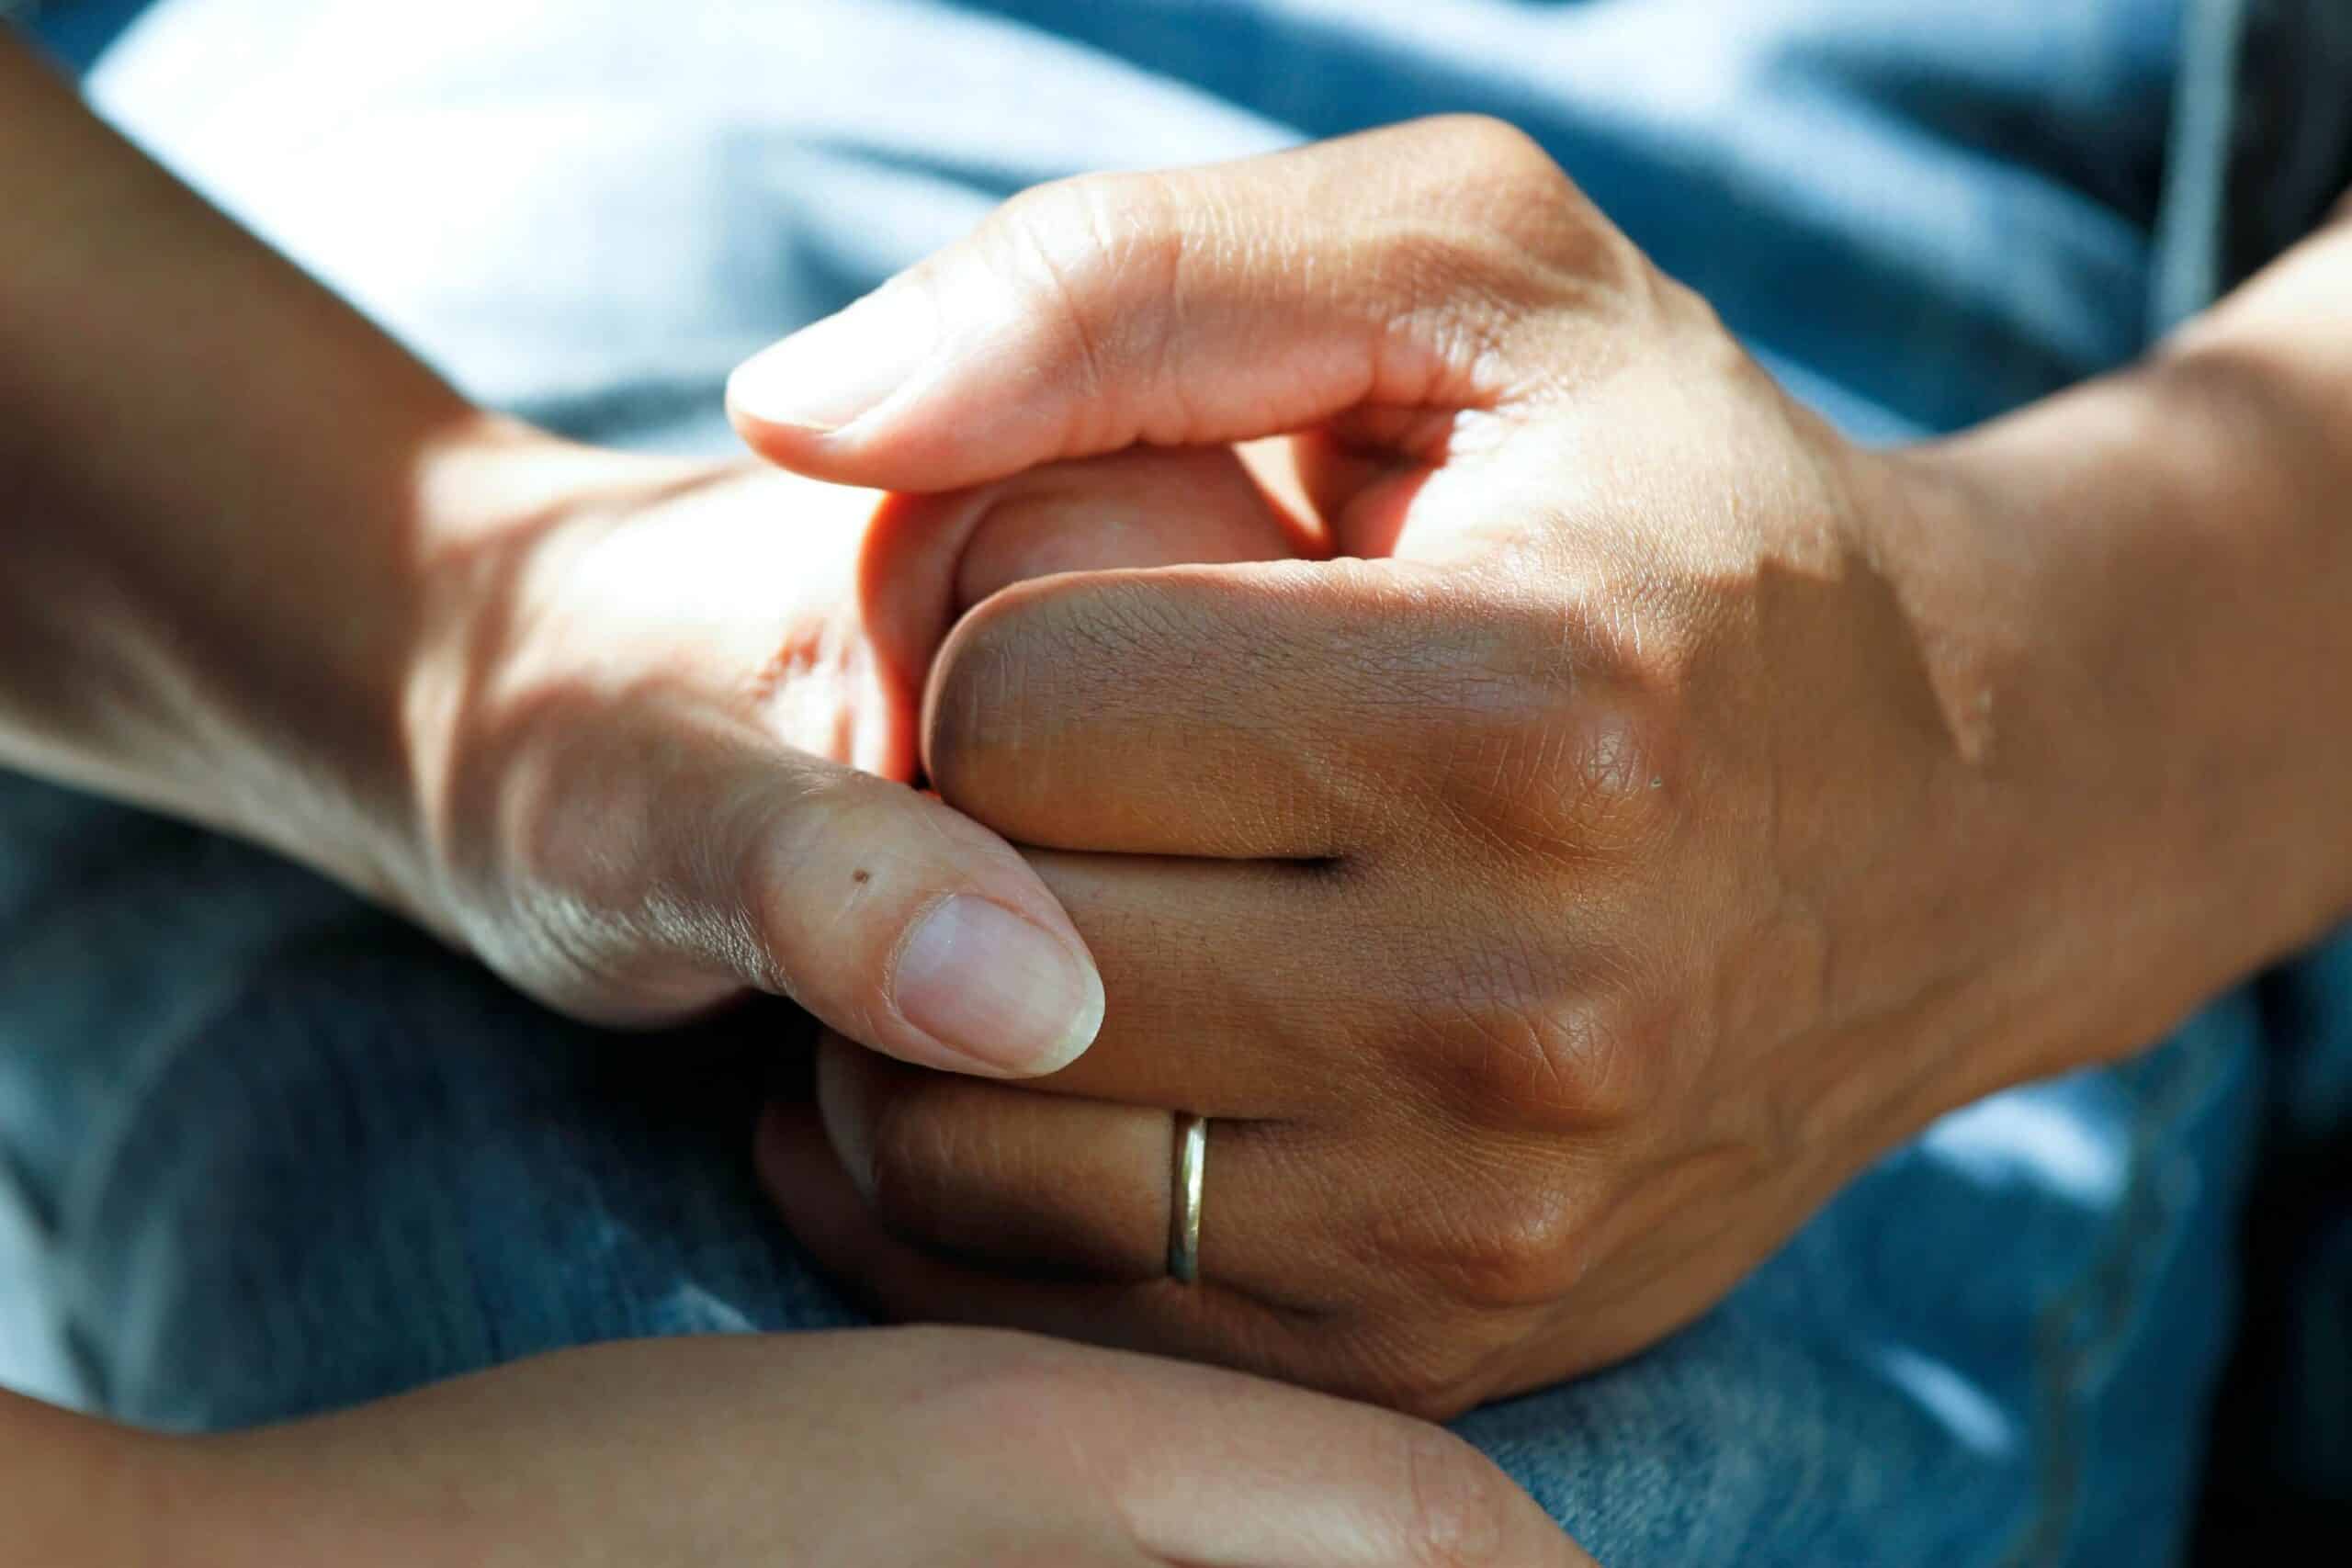 Is Crohn's Disease a Disability? Two hands are held together in a supportive and warm embrace